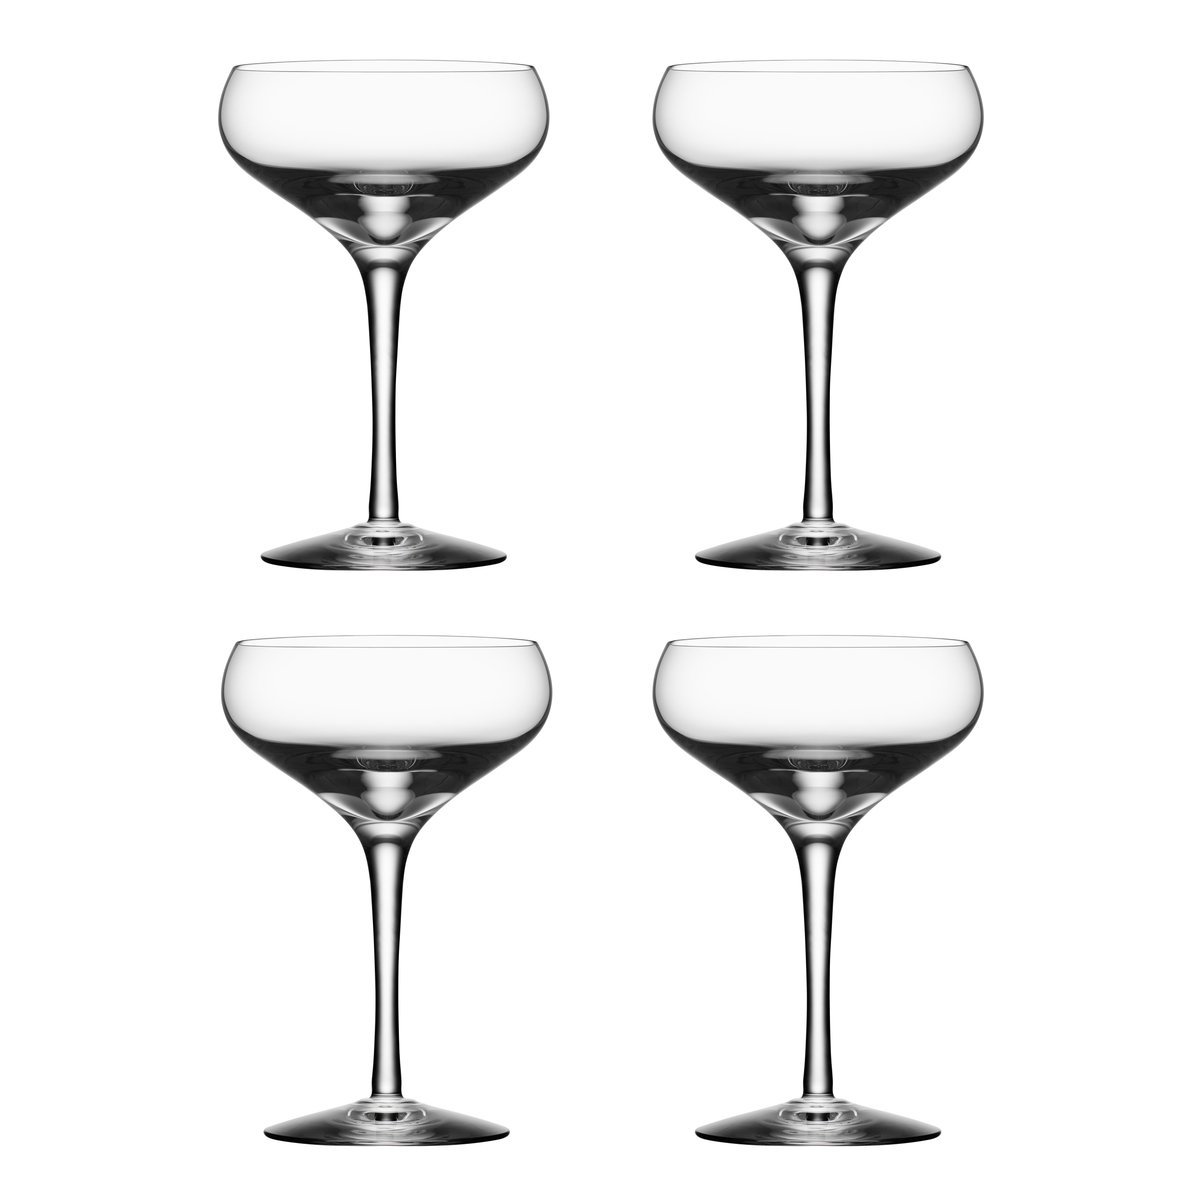 Orrefors More Coupe glas 4-pak 21 cl